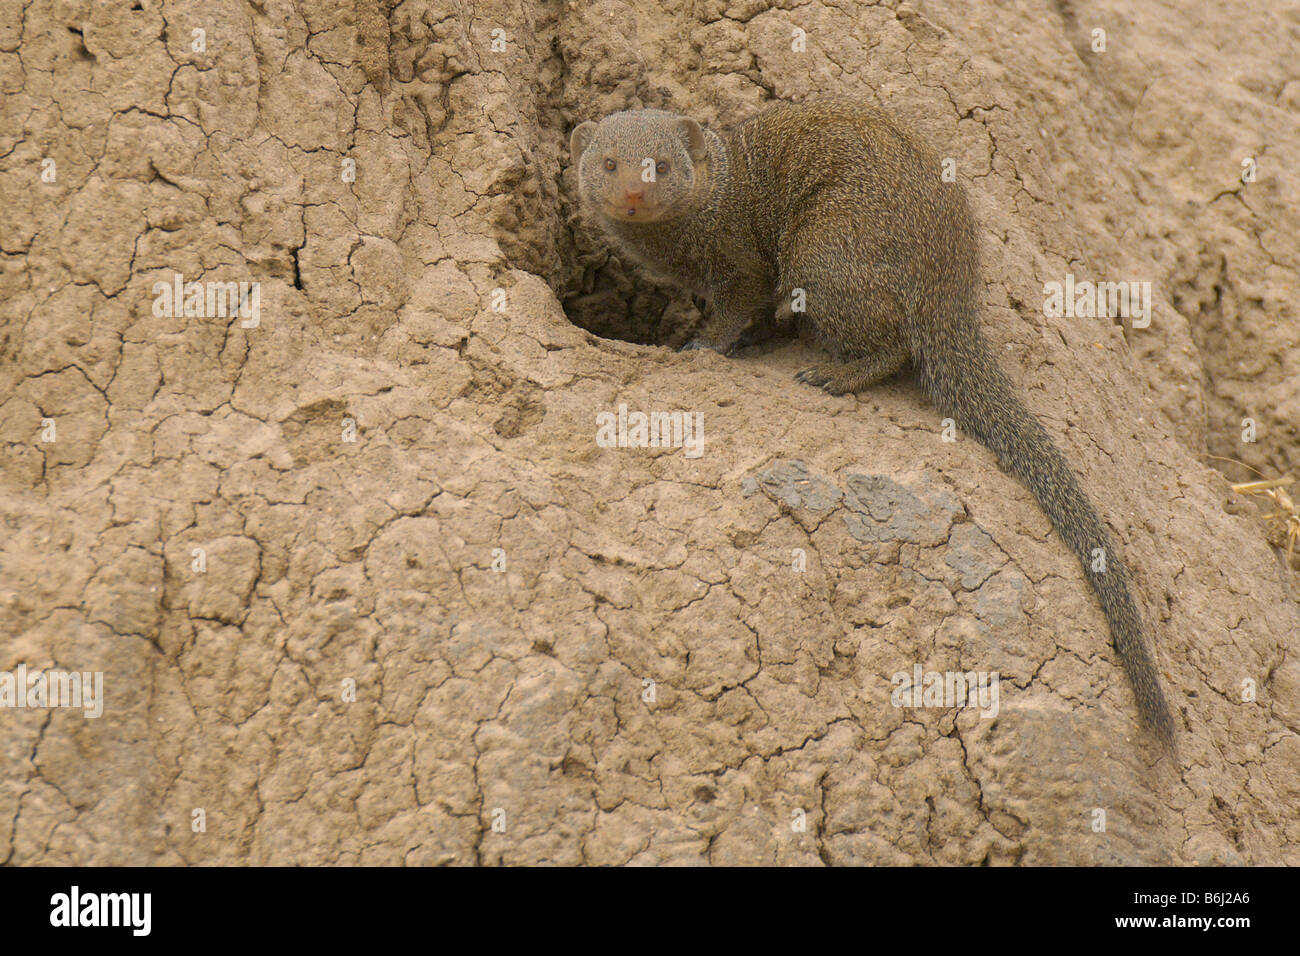 Dwarf mongoose, Helogale parvula, african mammal african wildlife small mammal smallest species of mongoose in southern africa a Stock Photo